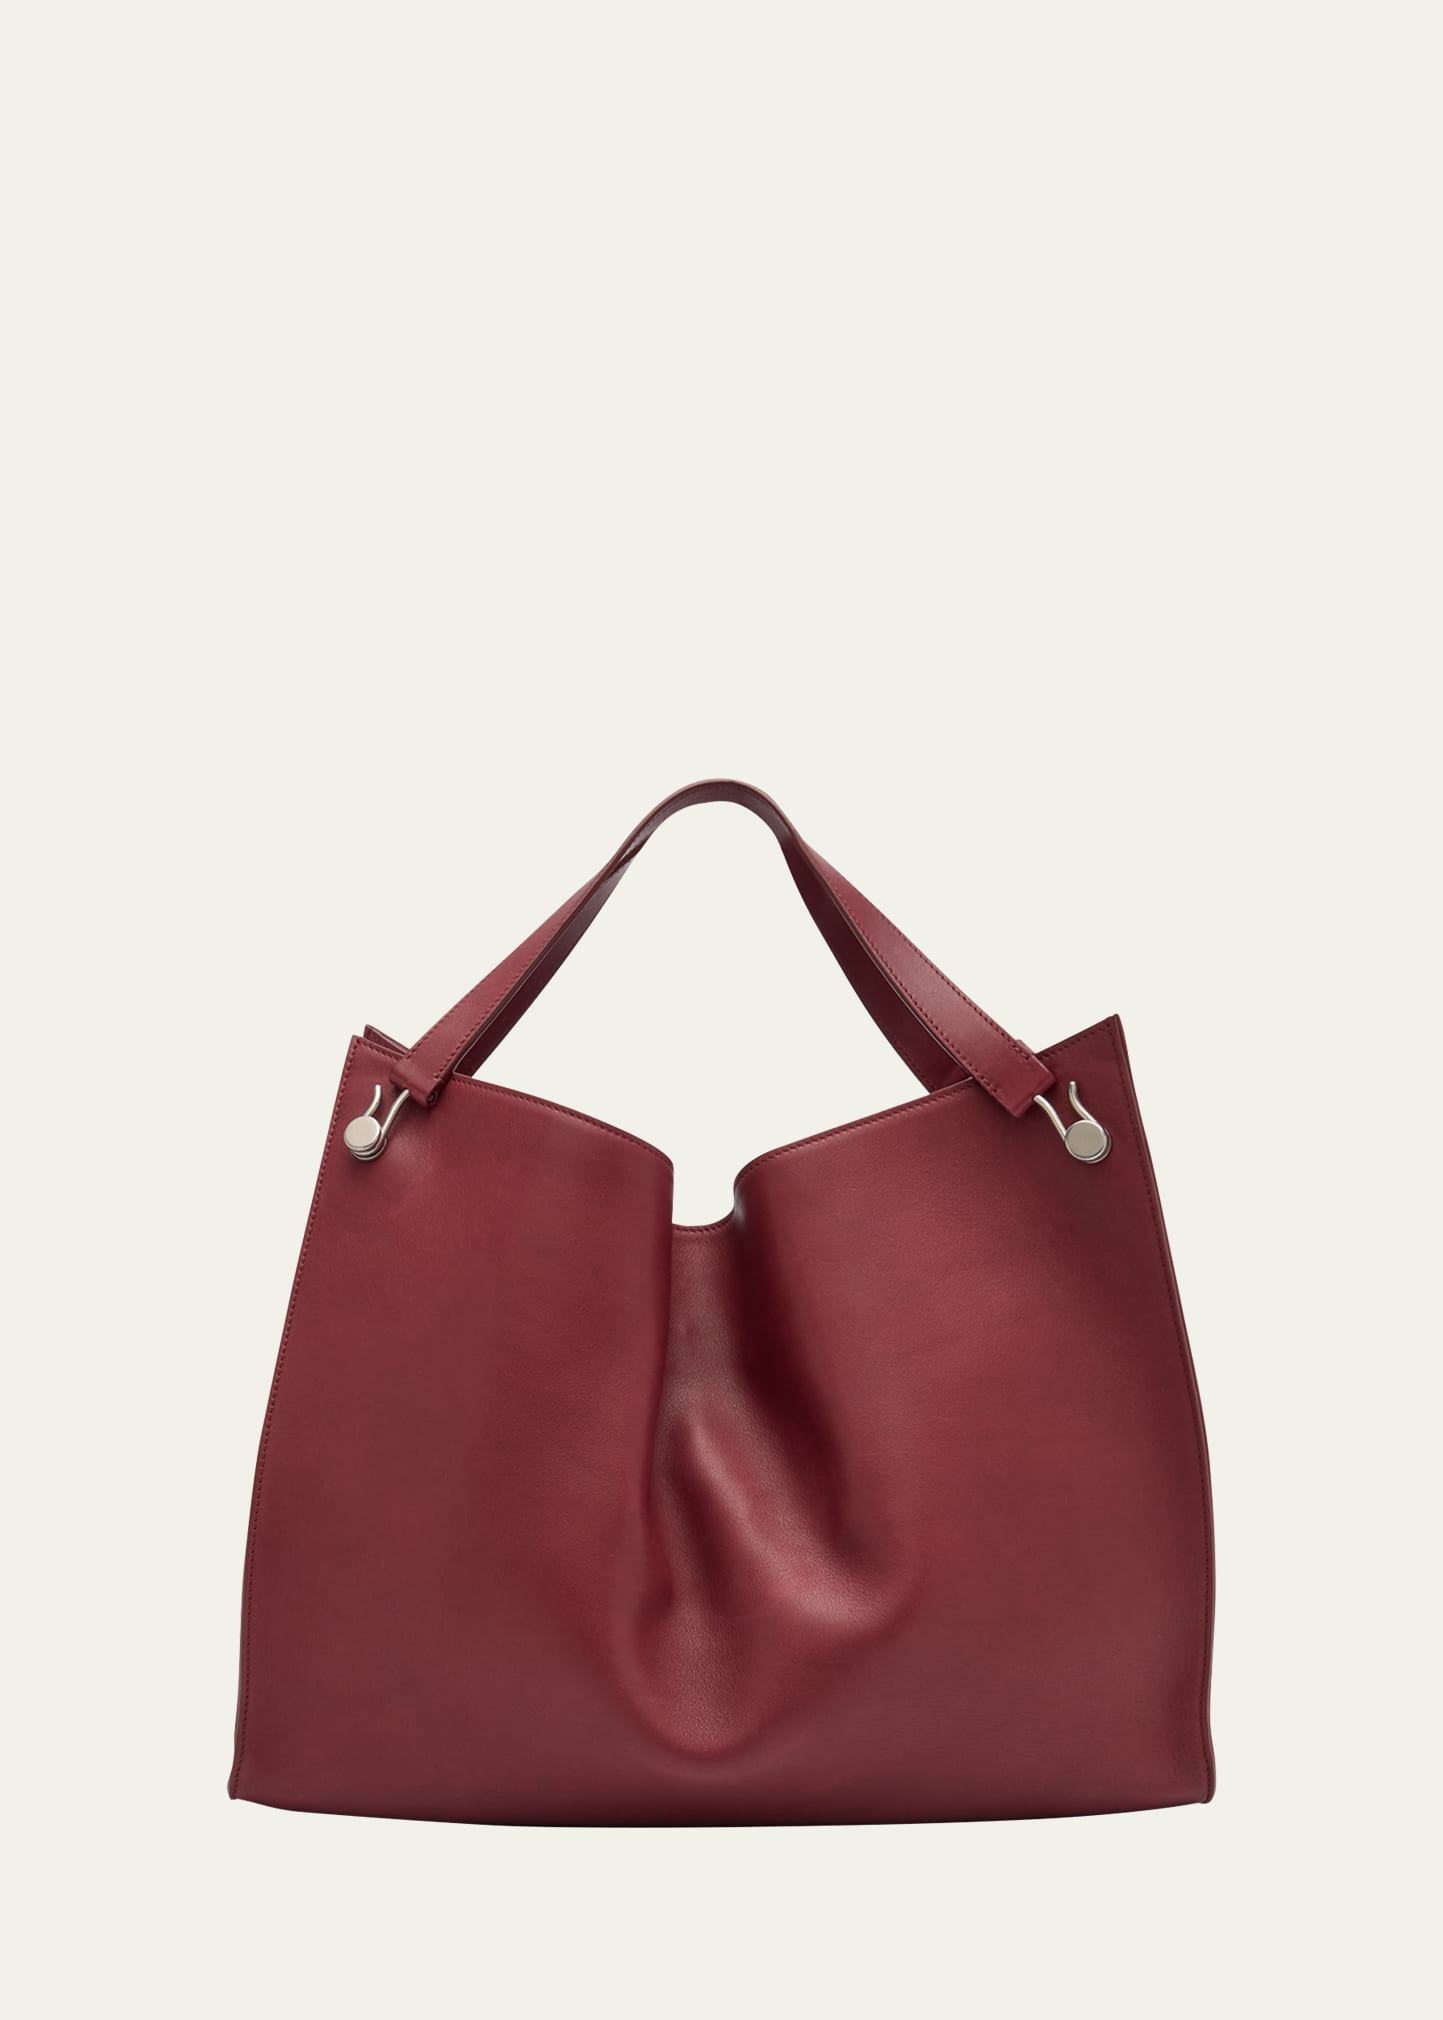 The Row Alexia Tote Bag In Saddle Leather In Burgundy